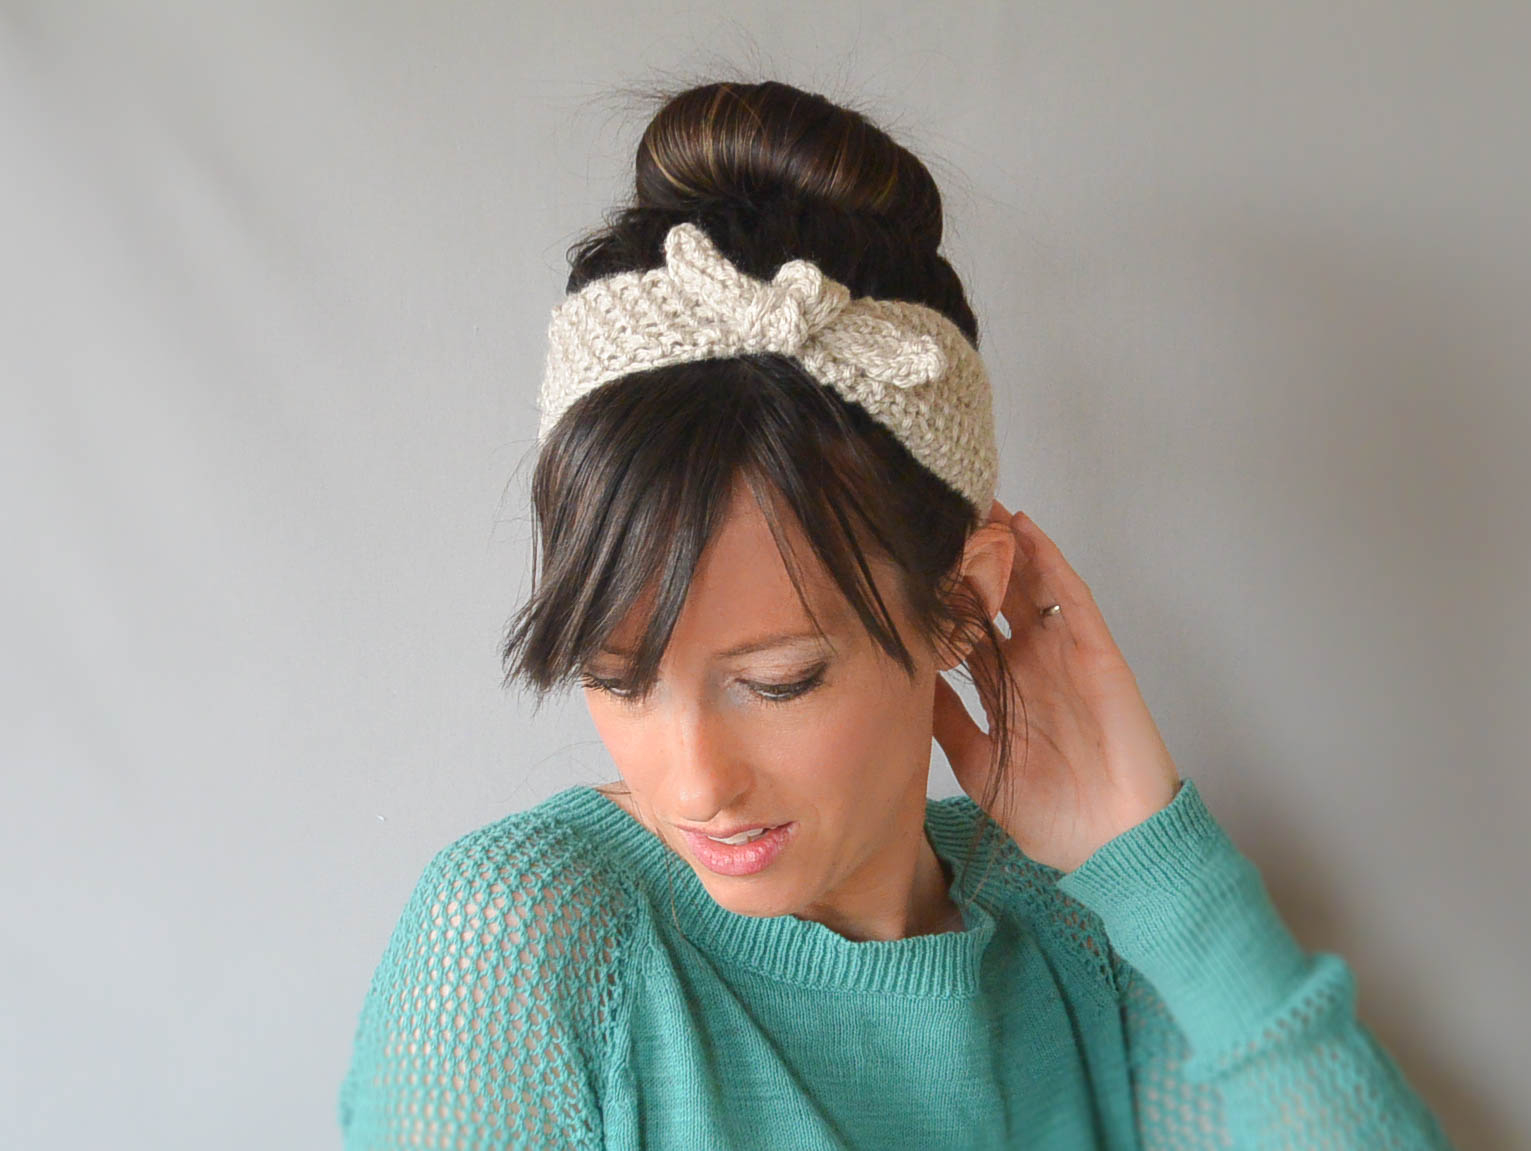 Knit Headband With Flower Pattern Knit Headband To Style Your Hair Crochet And Knitting Patterns 2019